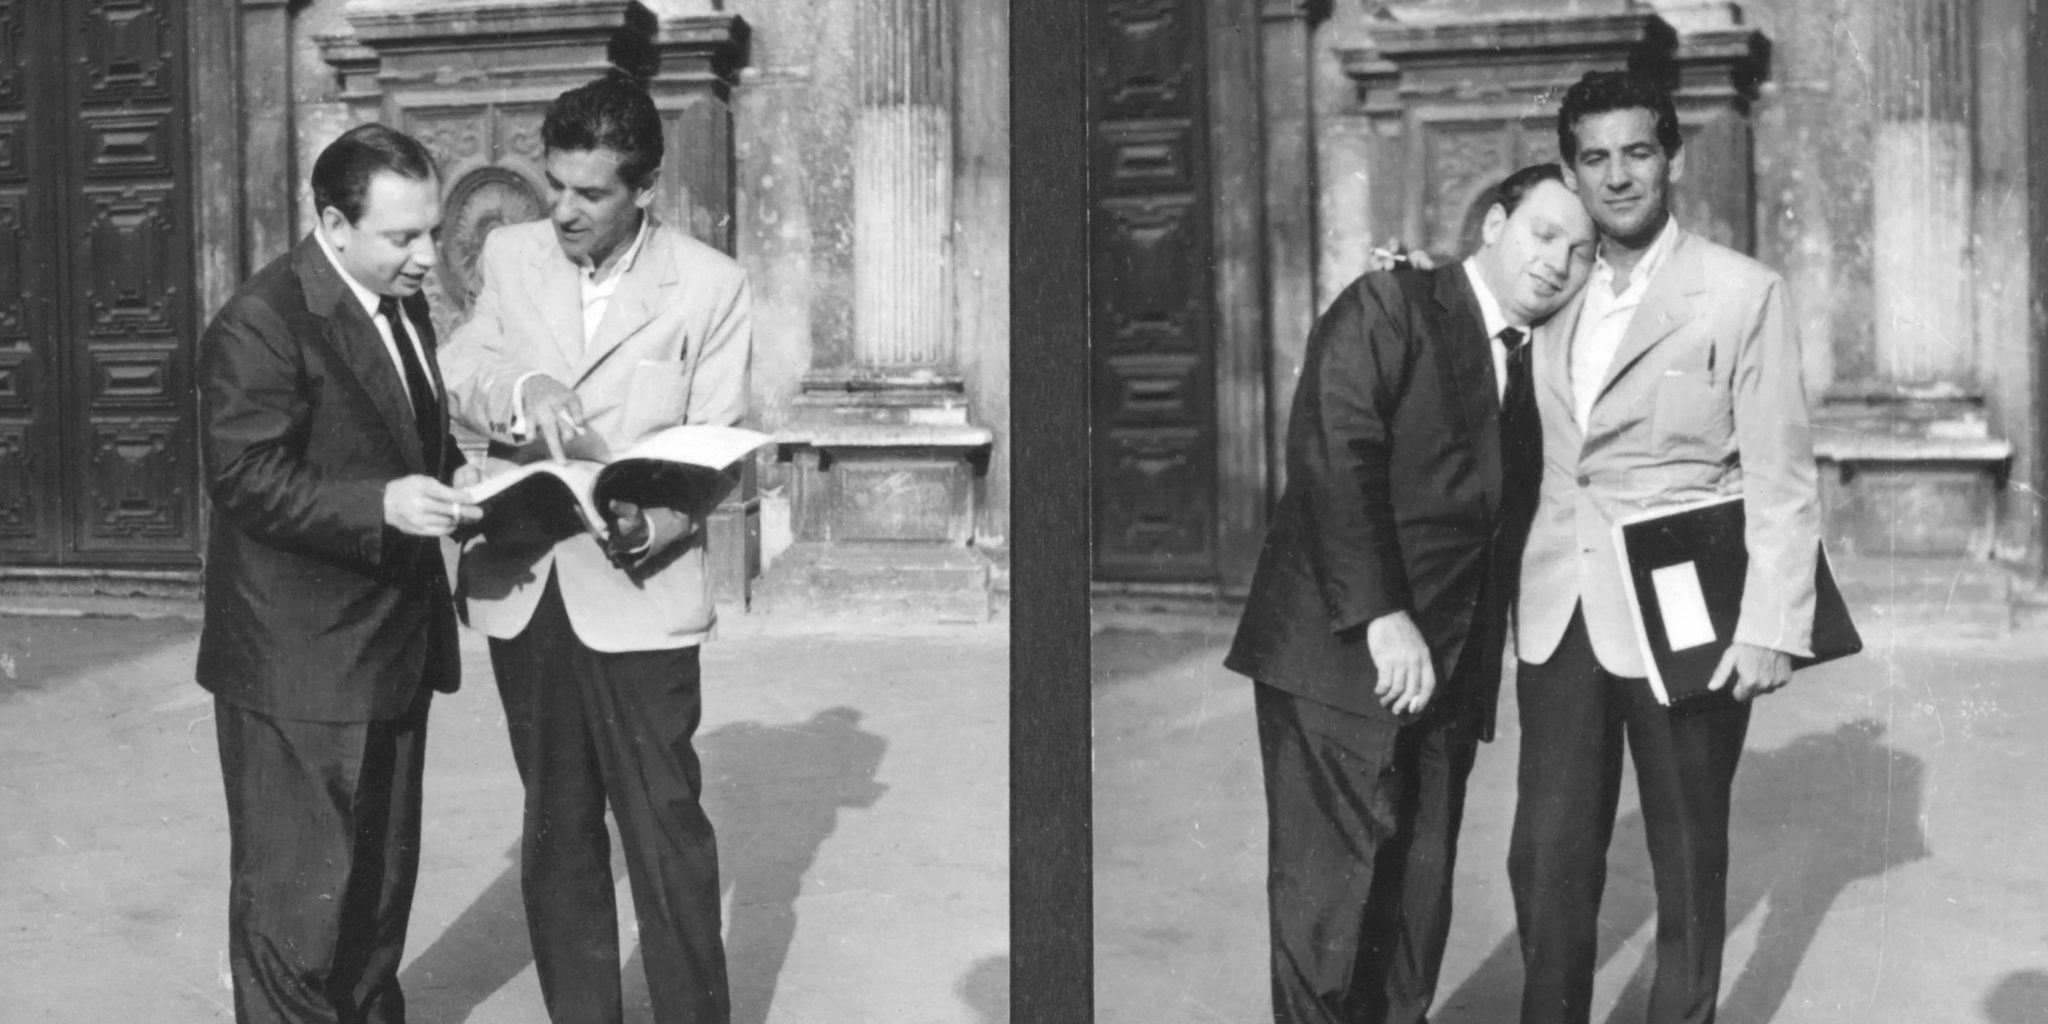 Leonard Bernstein and Isaac Stern in Venice, September 1954. (Credit: Library of Congress Music Division)